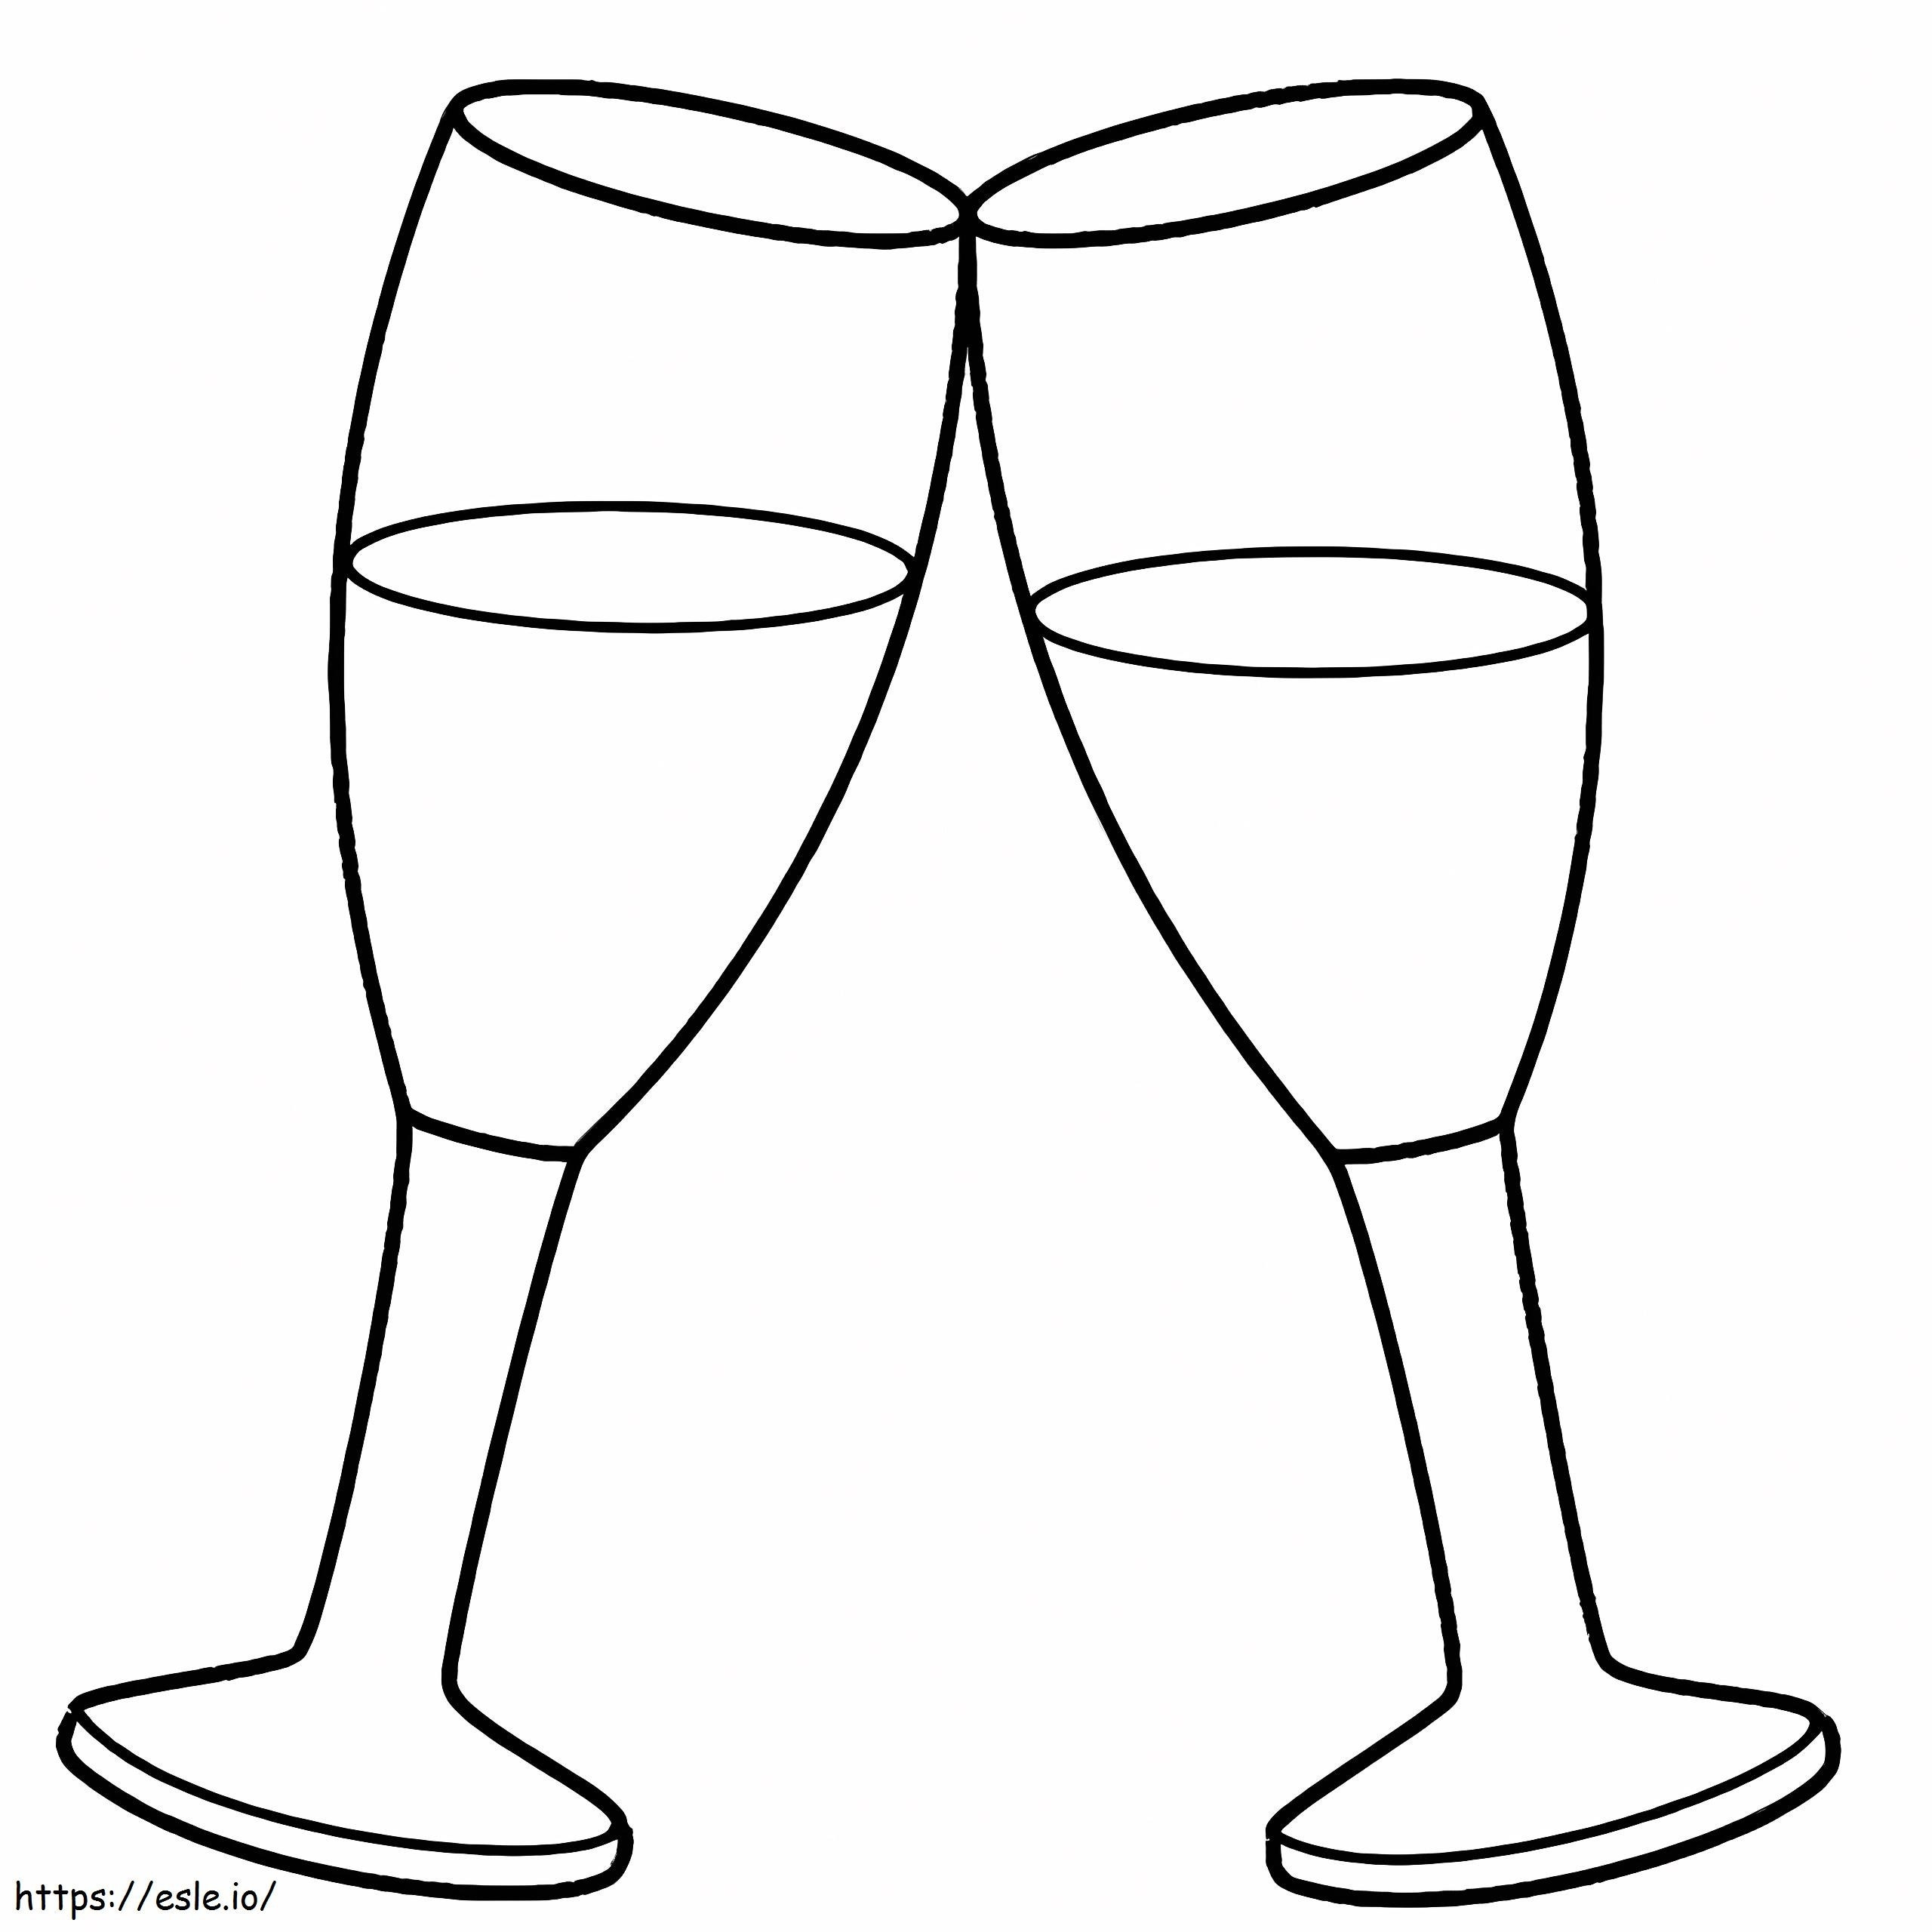 Glass coloring page